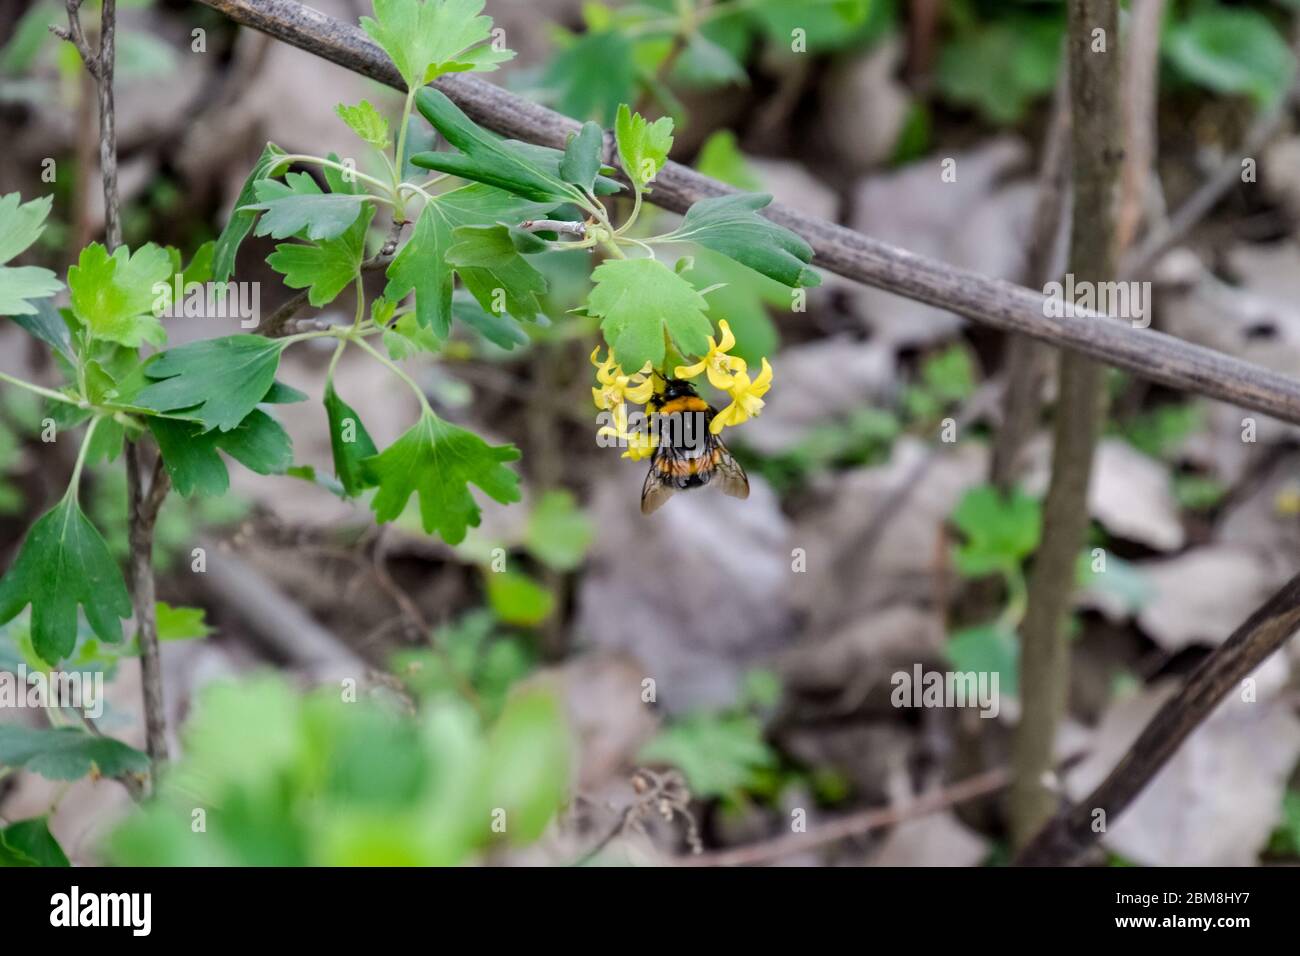 Large bumblebee on the flowers of currant. Pollination of flowers with bumblebees. Stock Photo